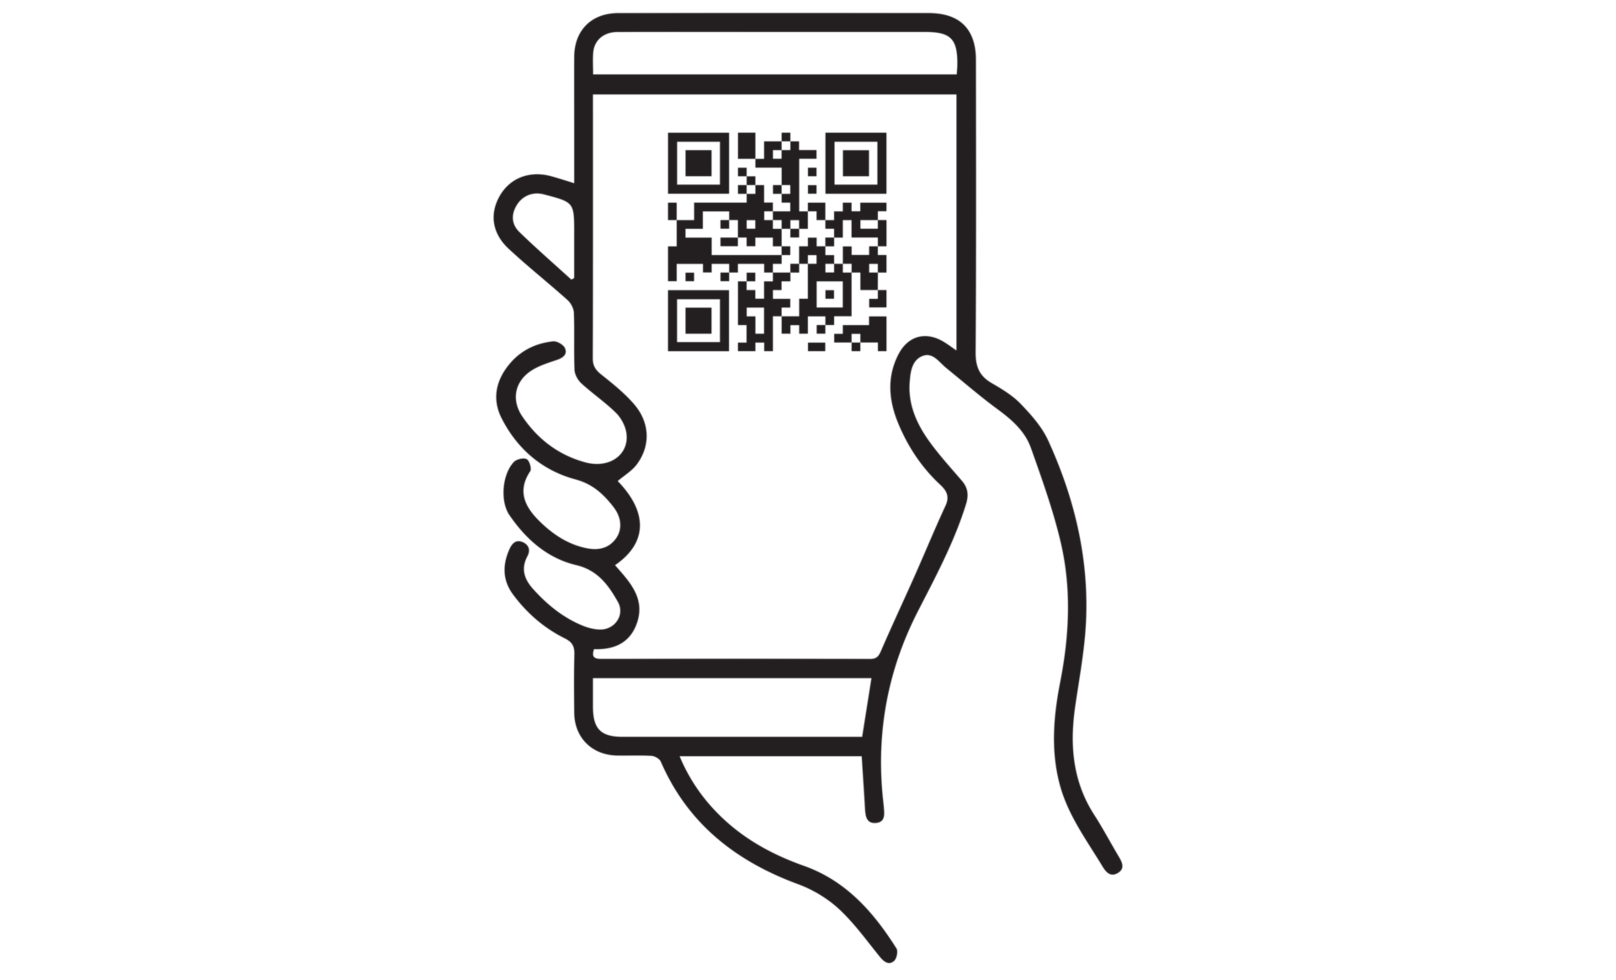 QR code scanning icon in smartphone on transparent background png